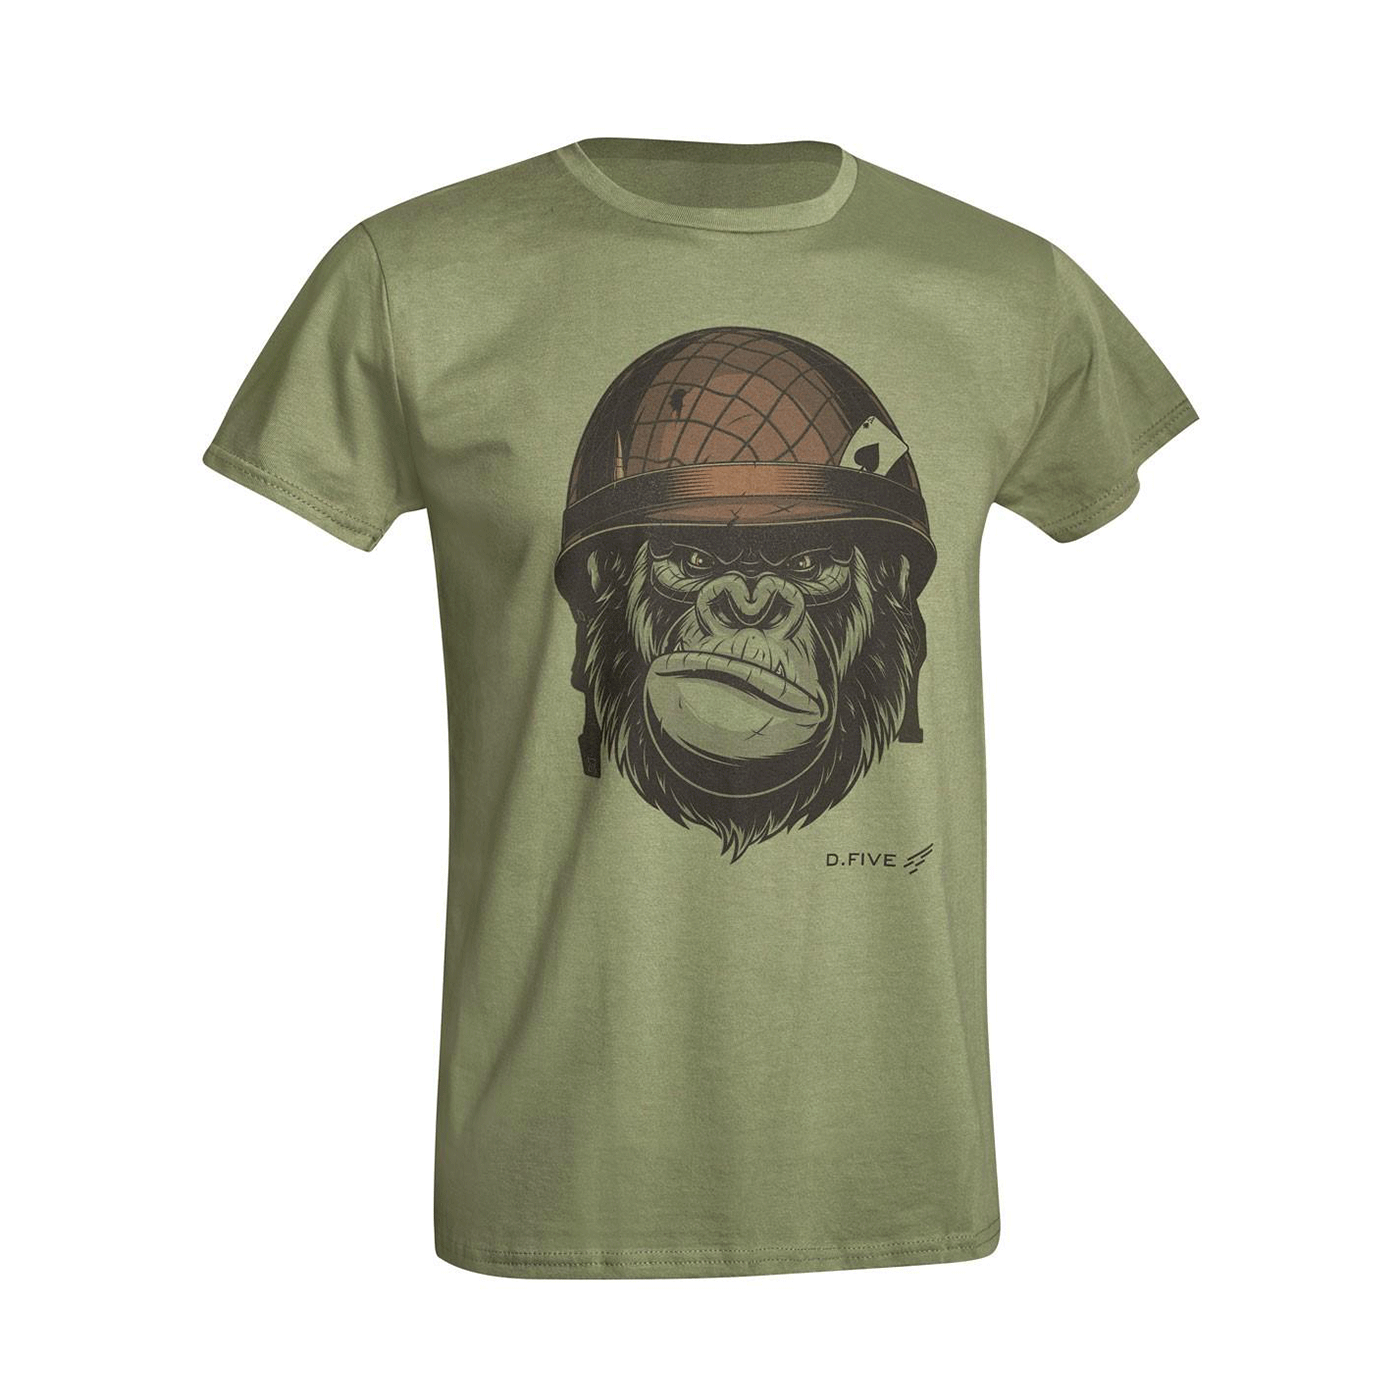 T-SHIRT - DEFCON 5 - FRONT CHEST MONKEY WITH HELMET OD Green